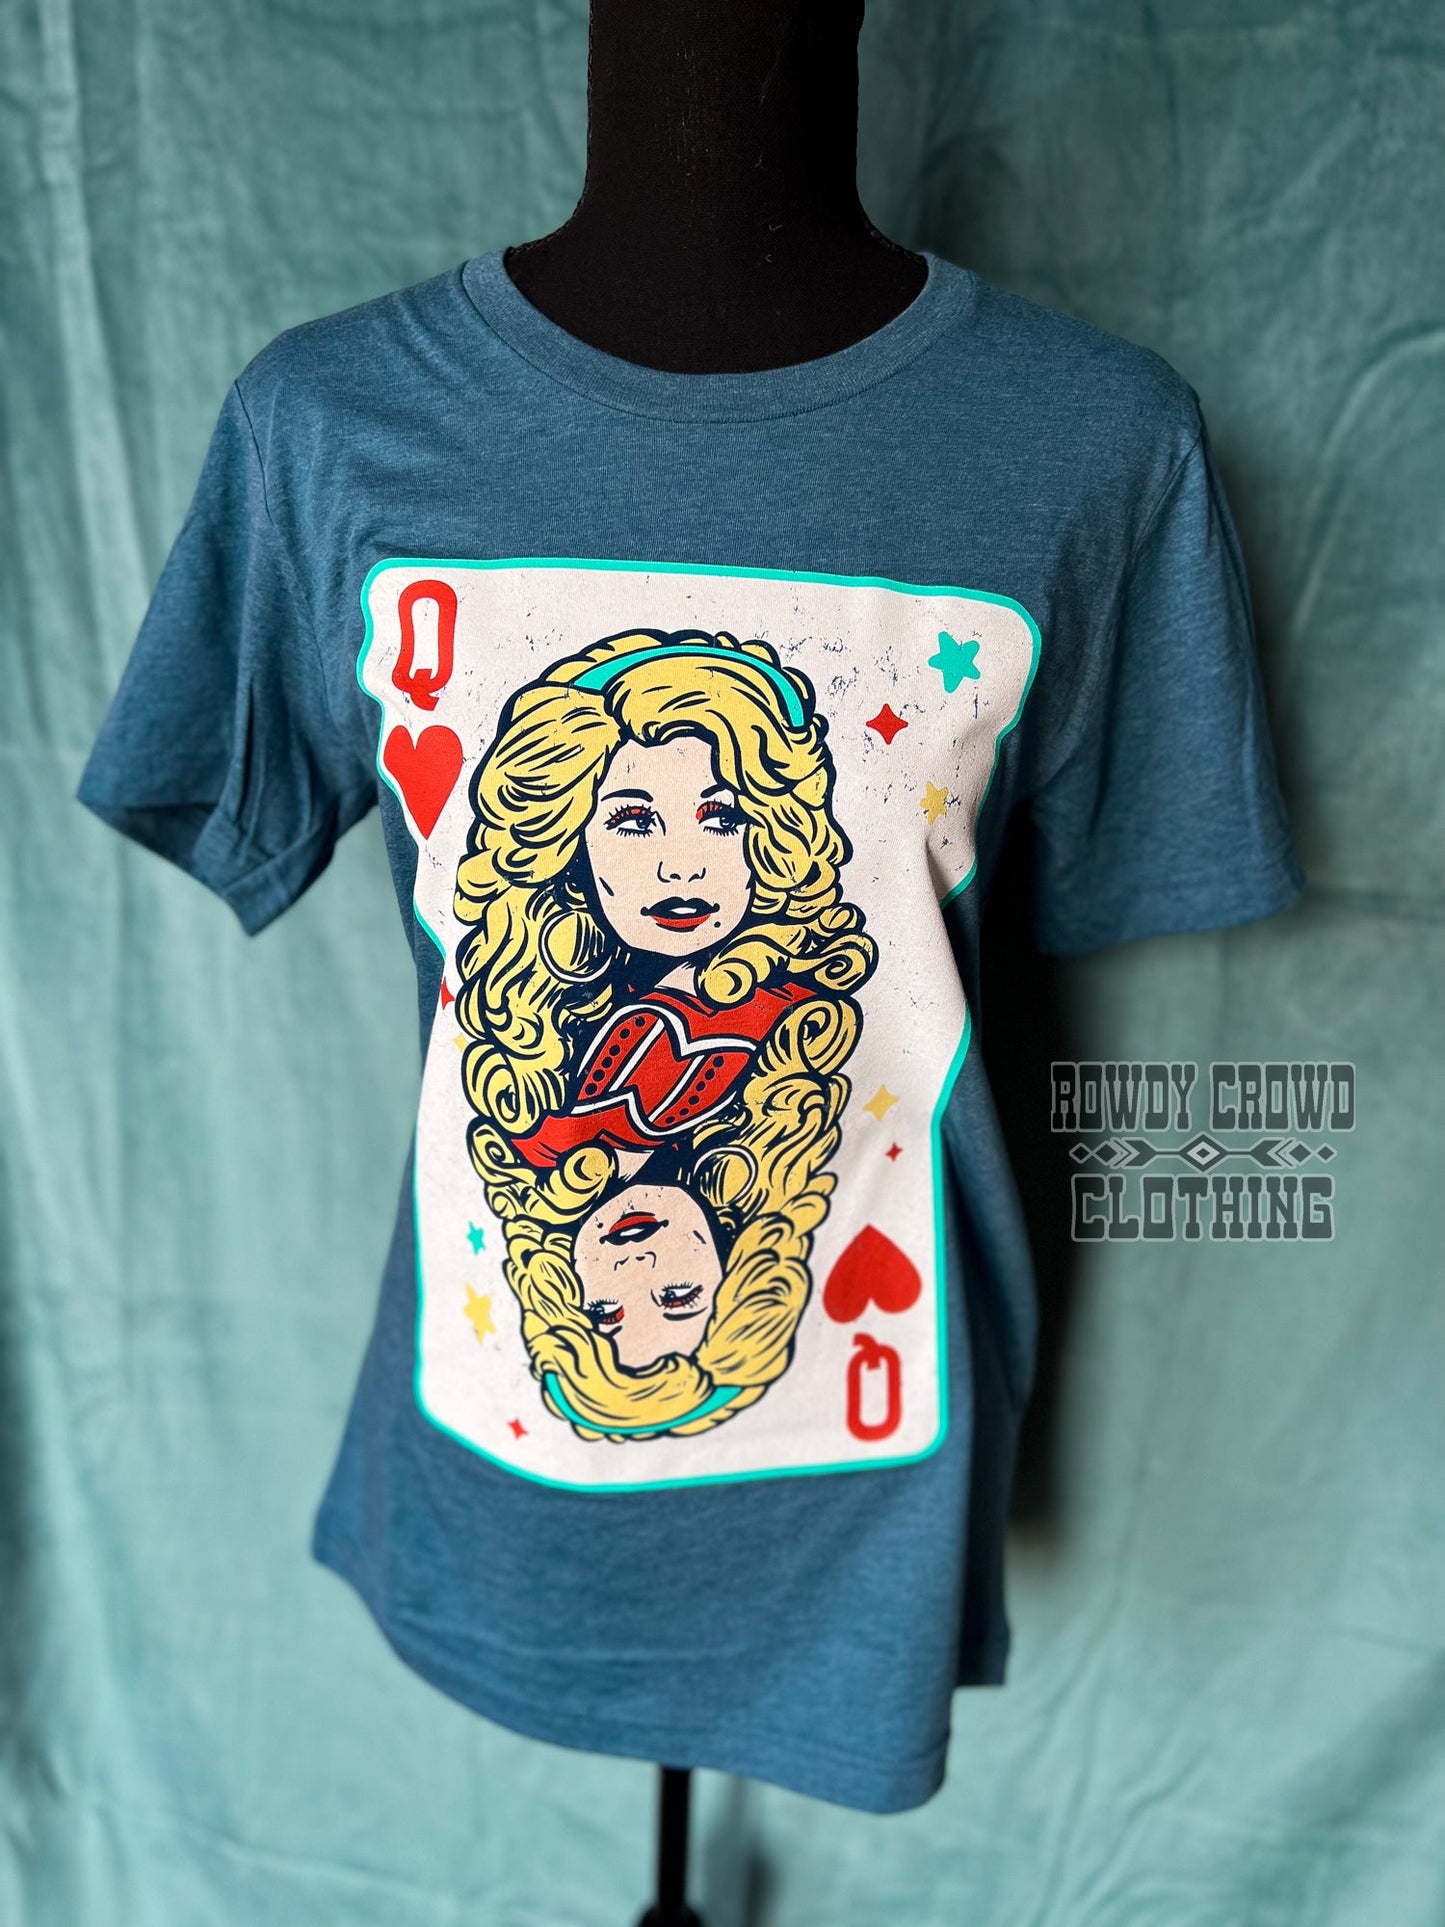 western apparel, western graphic tee, graphic western tees, wholesale clothing, western wholesale, women's western graphic tees, wholesale clothing and jewelry, western boutique clothing, western women's graphic tee, dolly parton, queen of hearts